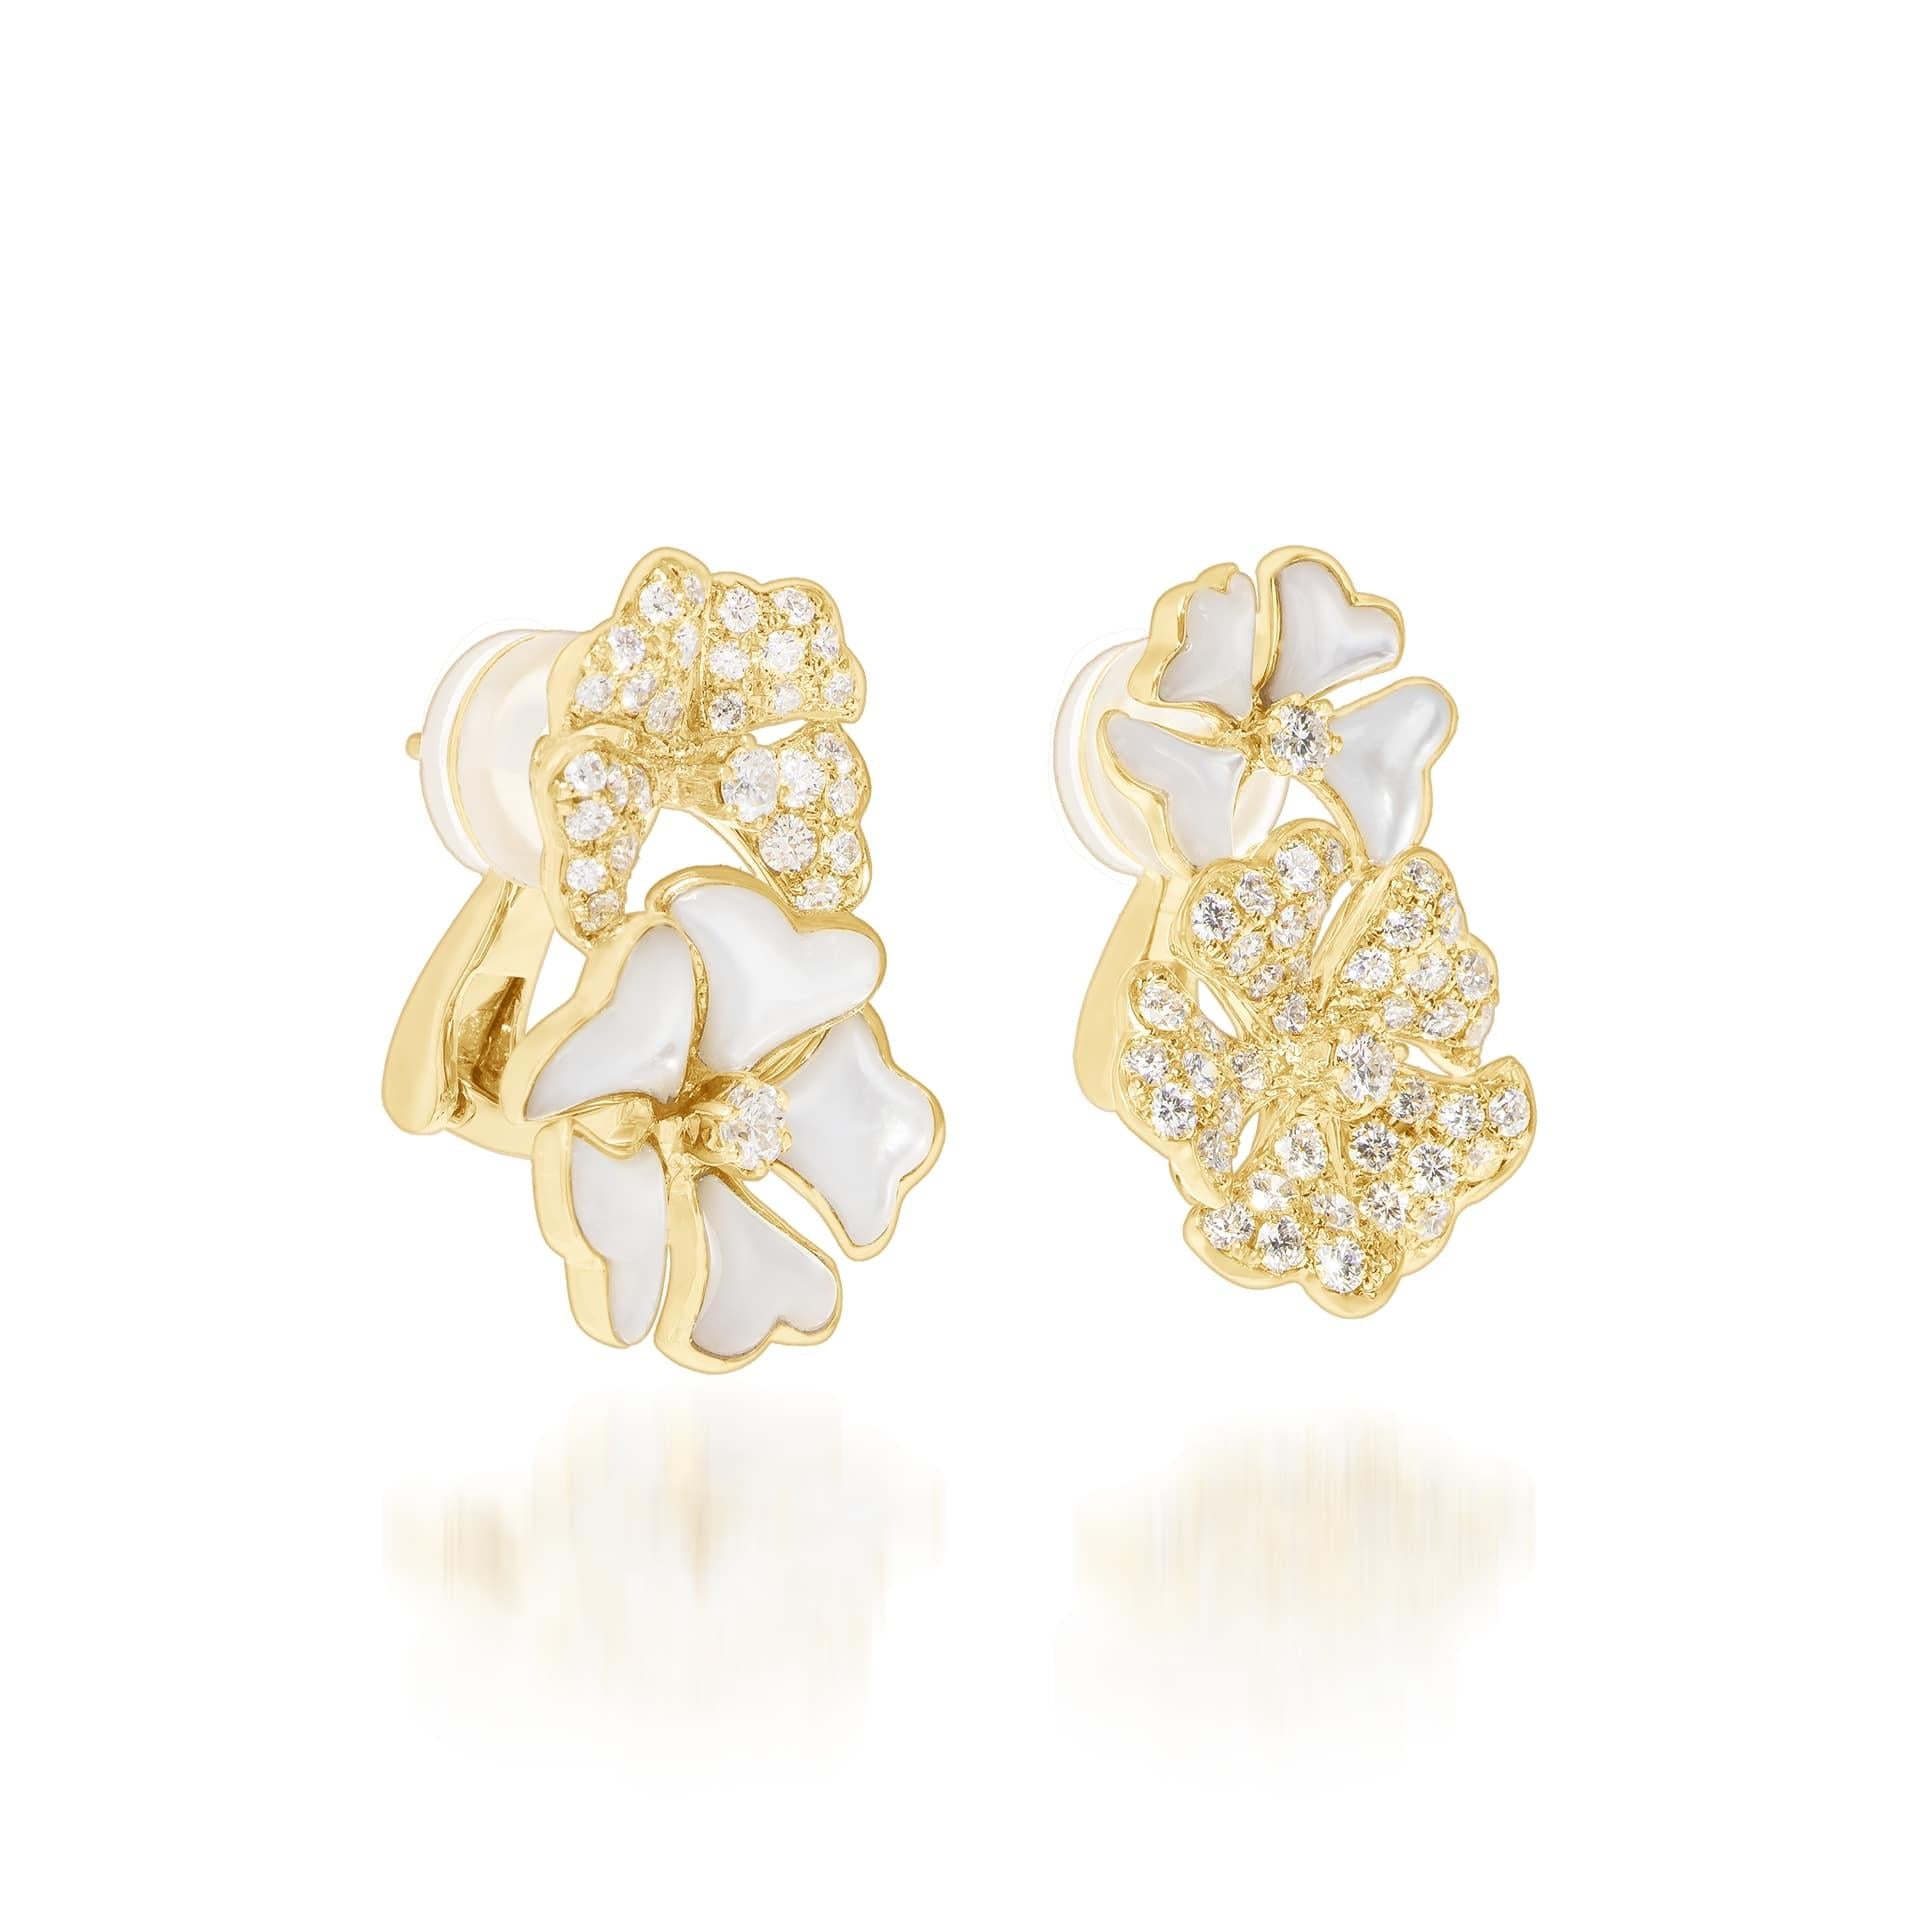 Bloom Diamond and White Mother-of-Pearl Double Bloom Earrings in 18K Yellow Gold

Inspired by the exquisite petals of the alpine cinquefoil, the Bloom collection contrasts the richness of diamonds and precious metals with the light versatility of